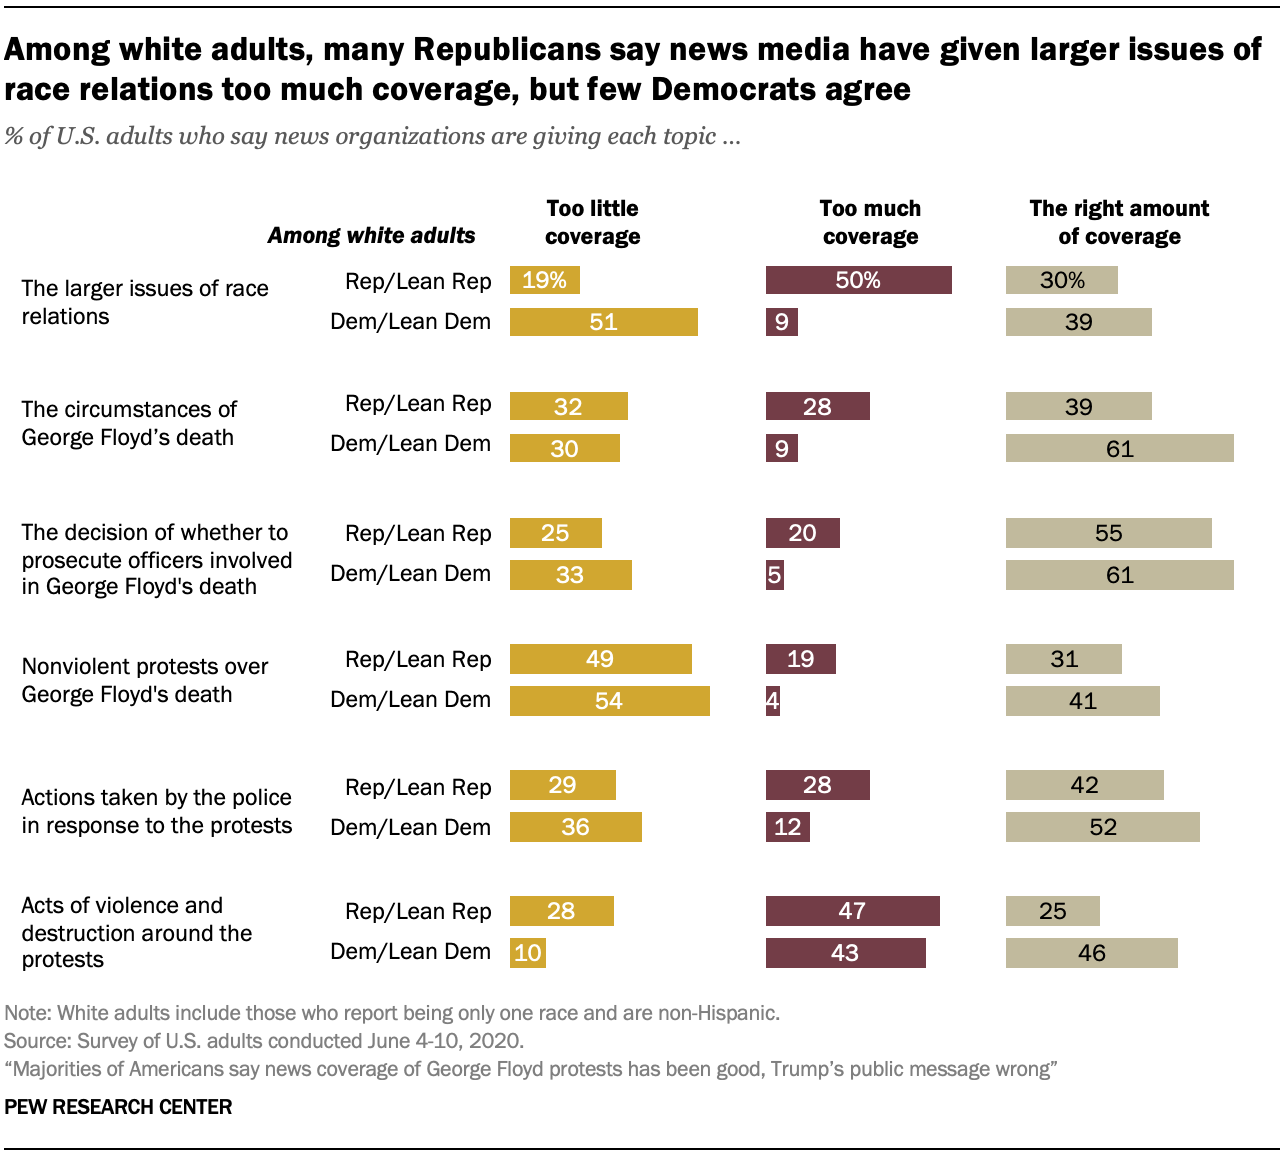 Among white adults, many Republicans say news media have given larger issues of race relations too much coverage, but few Democrats agree